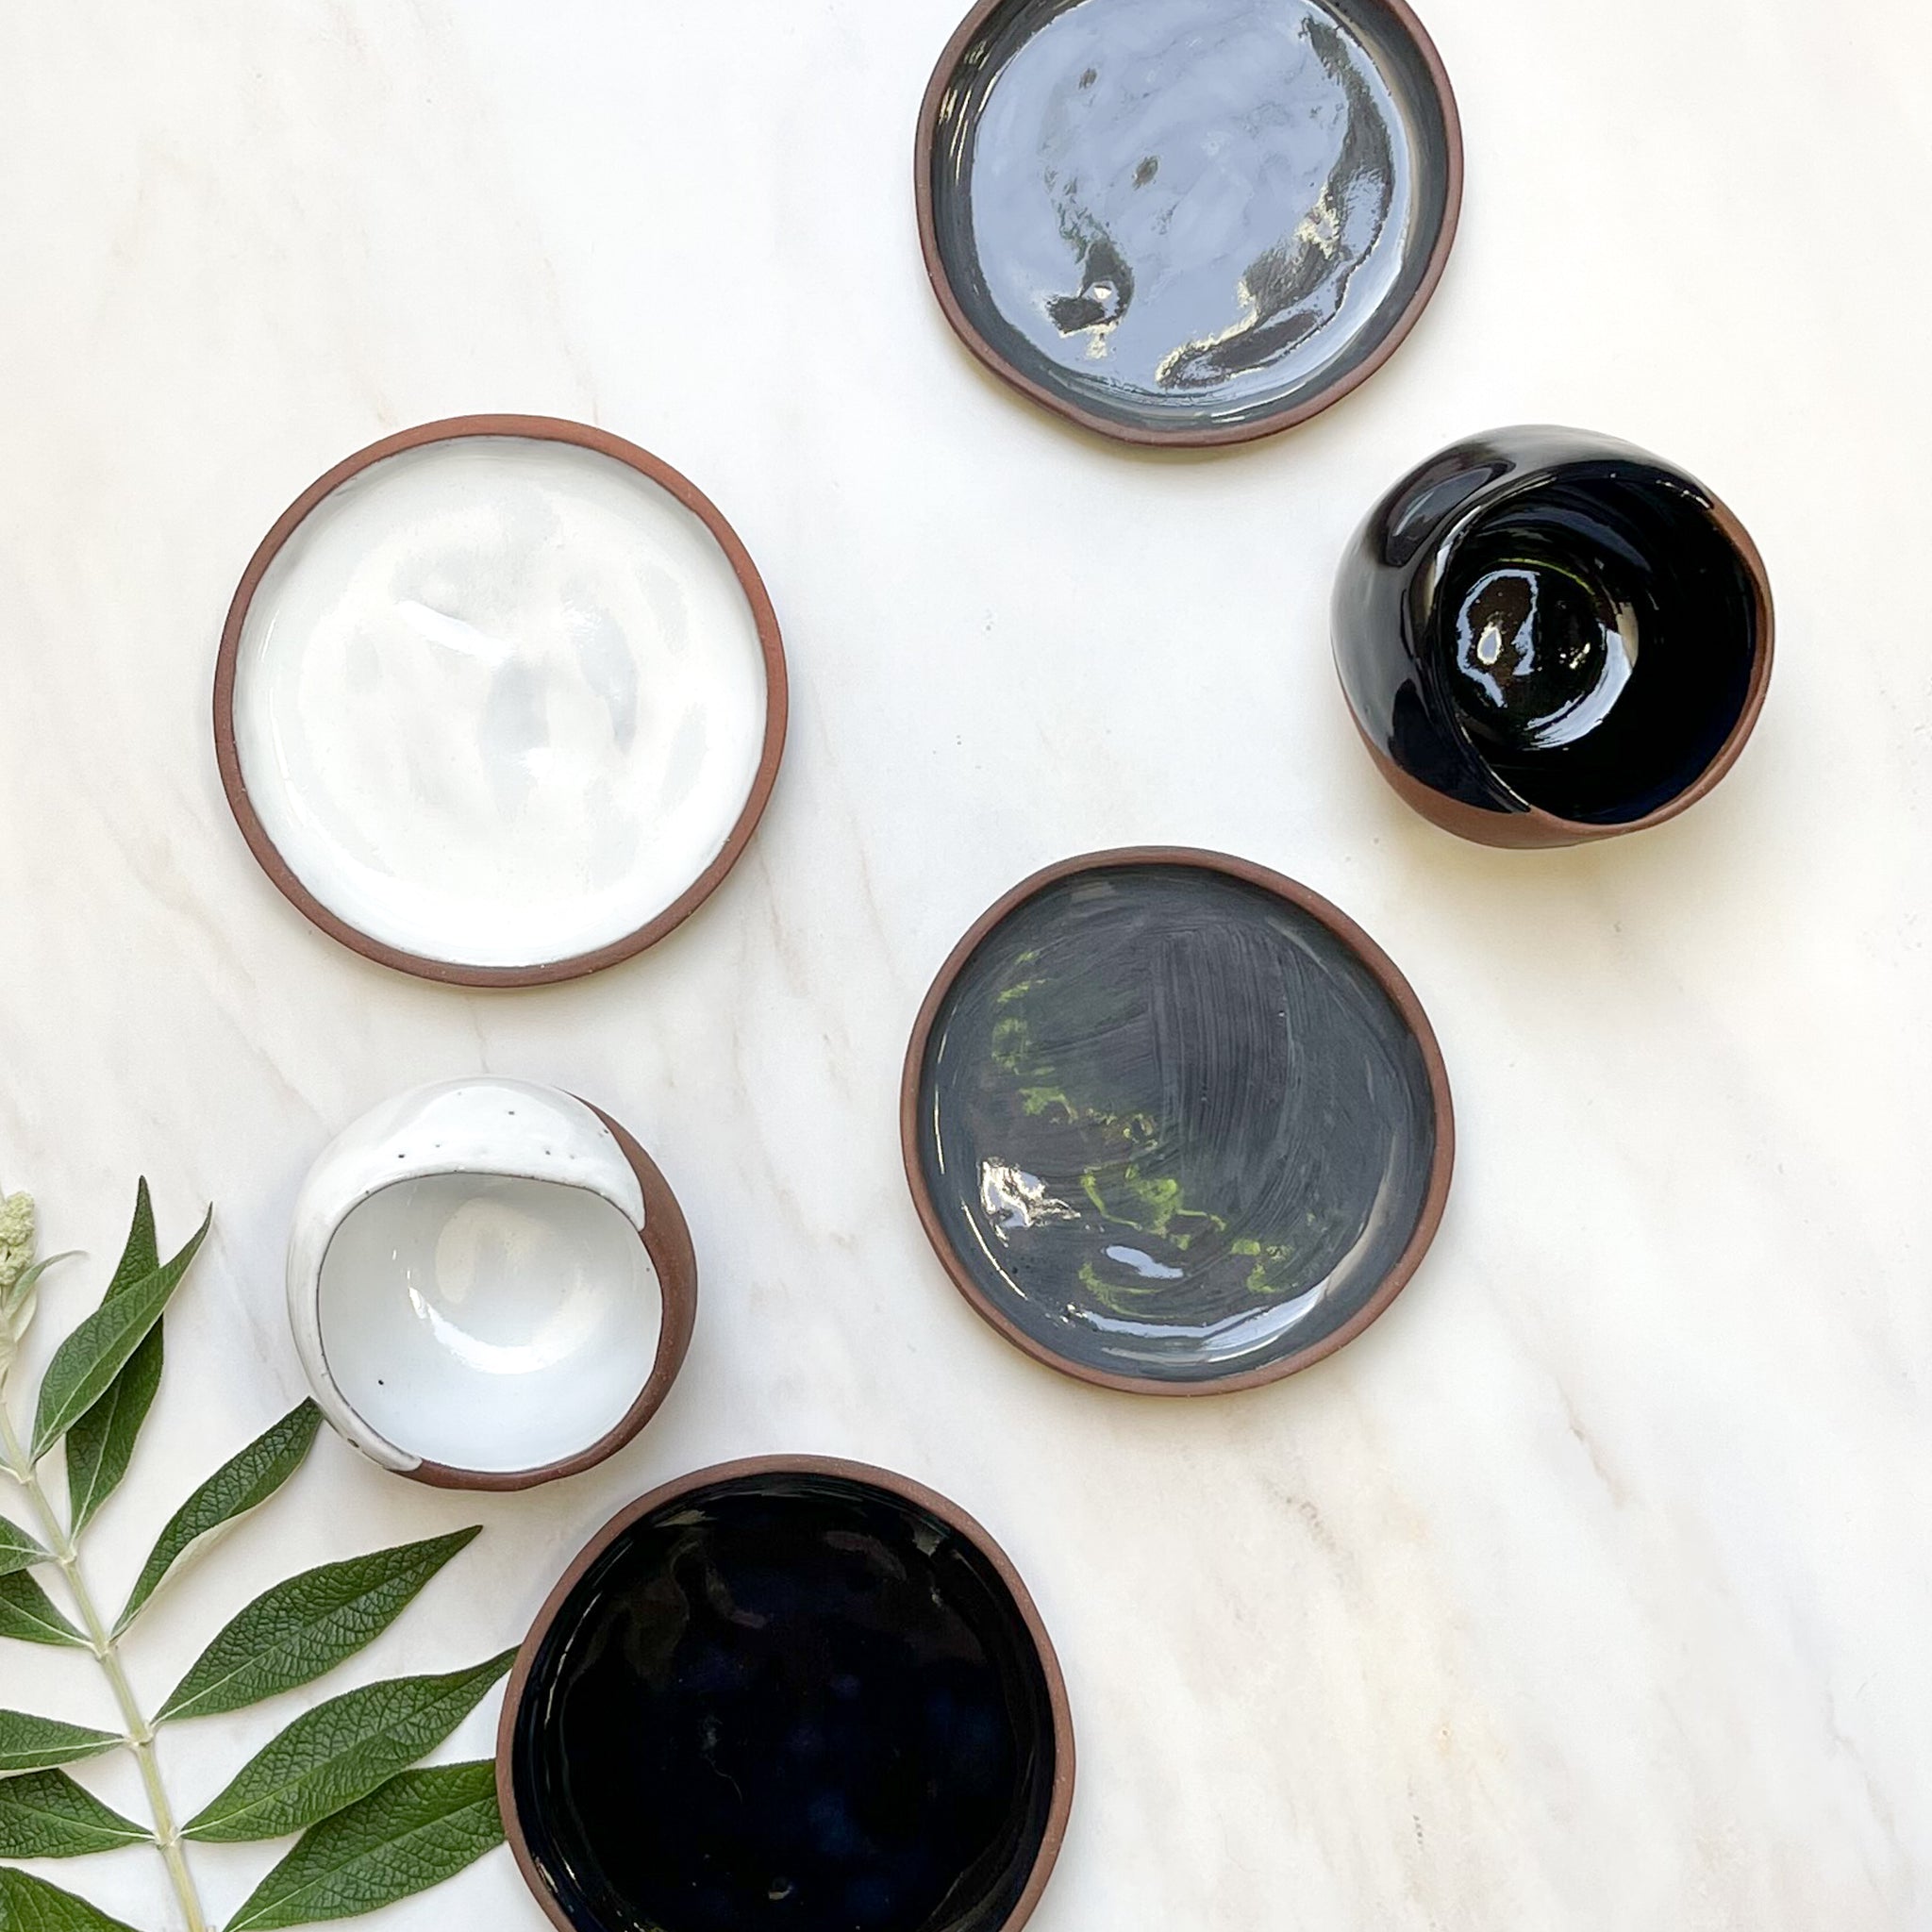 A set of small ceramic plates and cups on a marble counter with a green leaf in the corner.